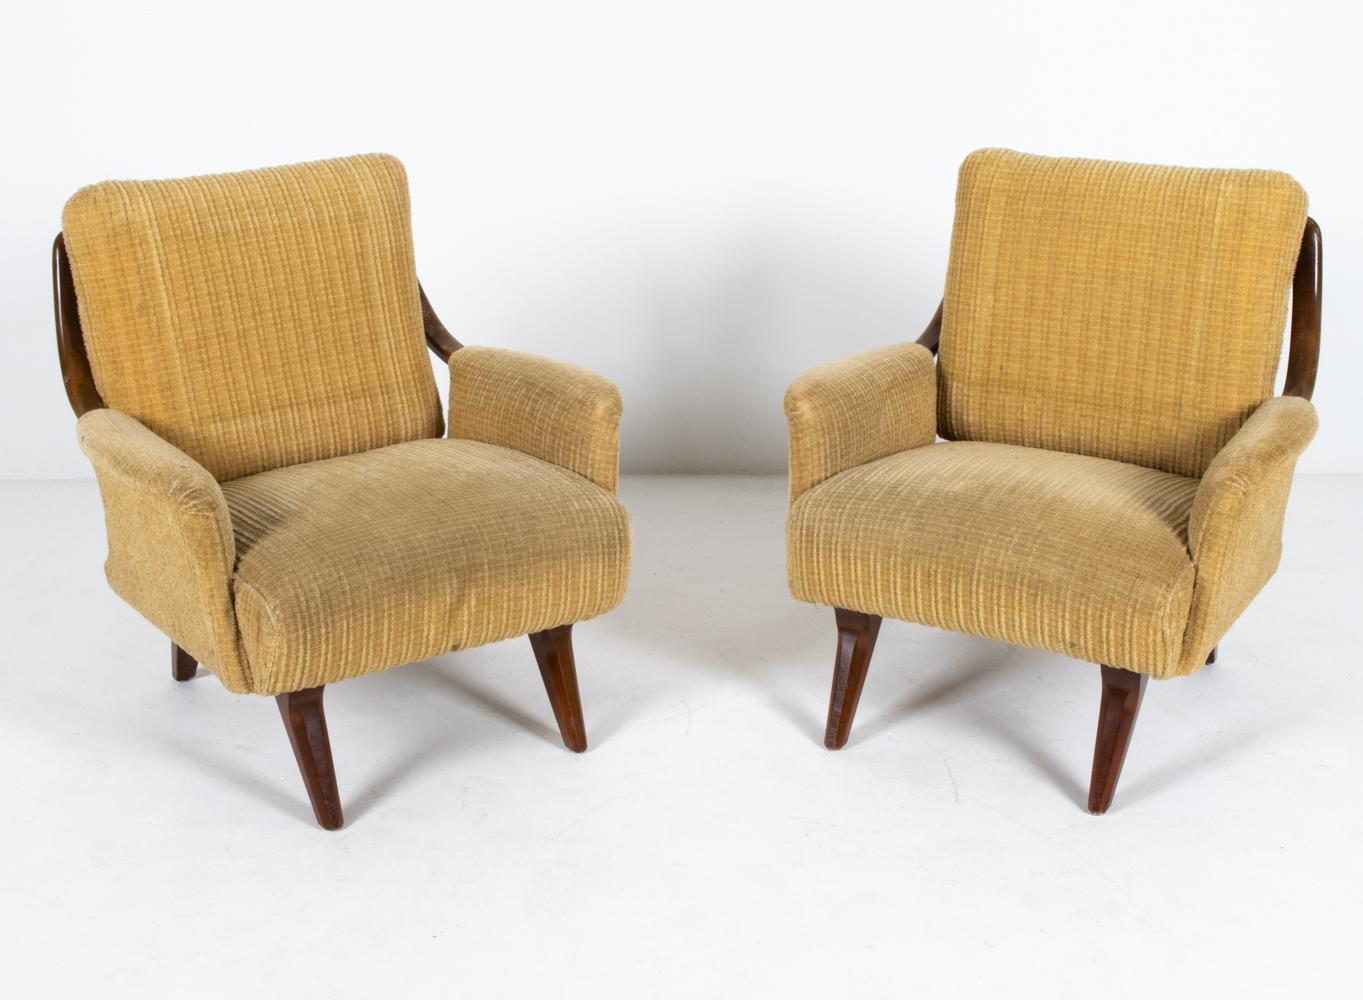 A fabulous pair of Danish mid-century lounge chairs with sculptural frames of stained beechwood, c. 1950's. With curves and angles inspired from the Atomic Age of design, these modern easy chairs are eye-catching statement pieces from every side.